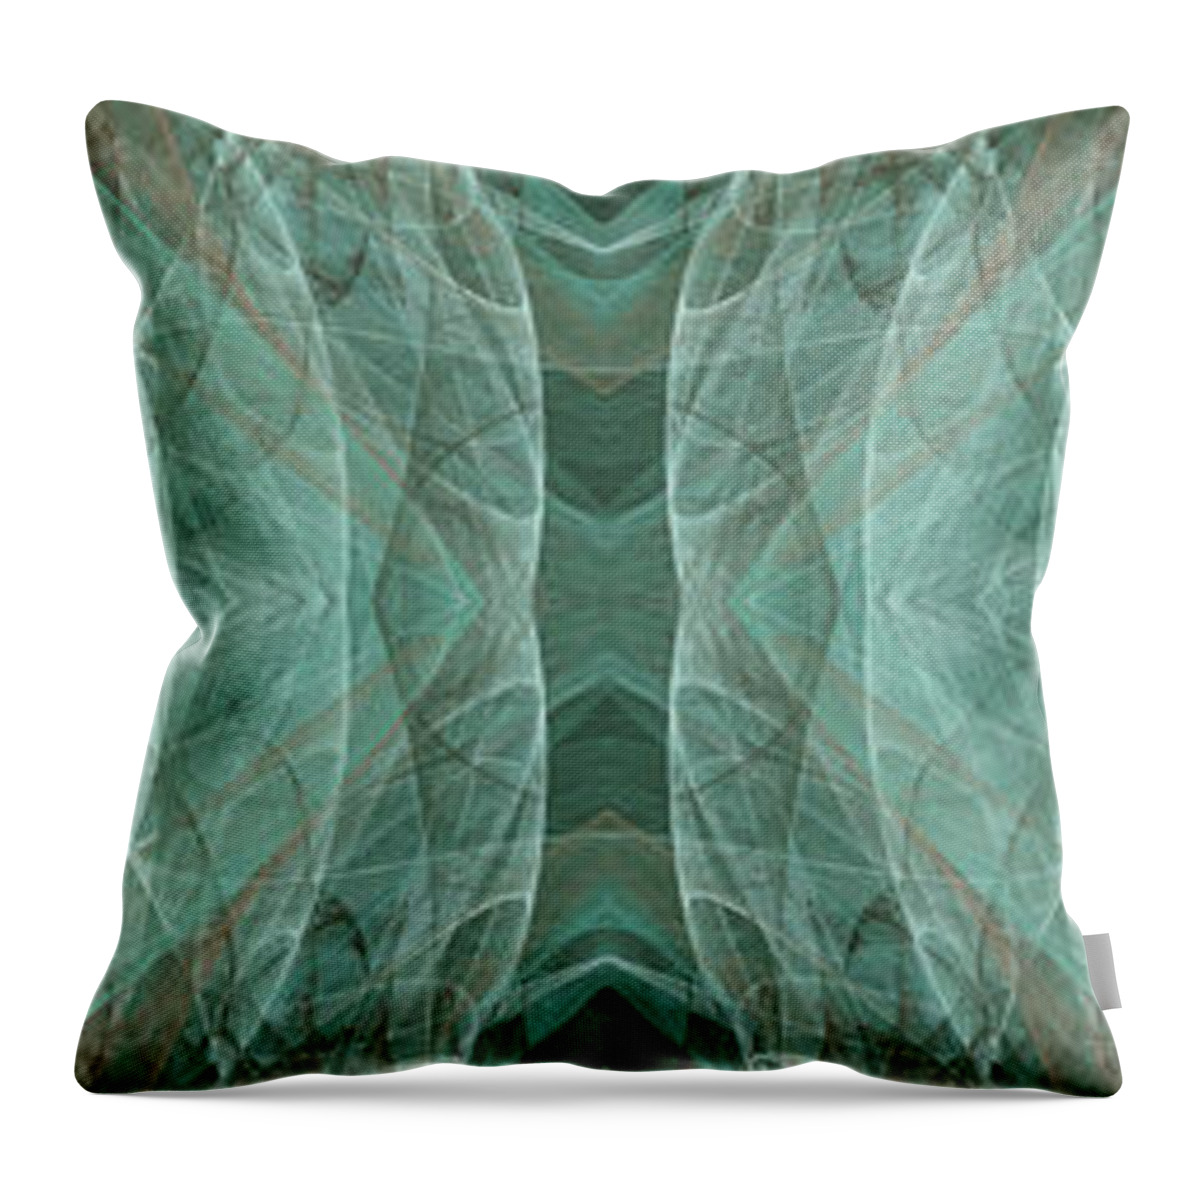 Abstract Throw Pillow featuring the digital art Crashing Waves Of Green 1 - Panorama - Abstract - Fractal Art by Andee Design